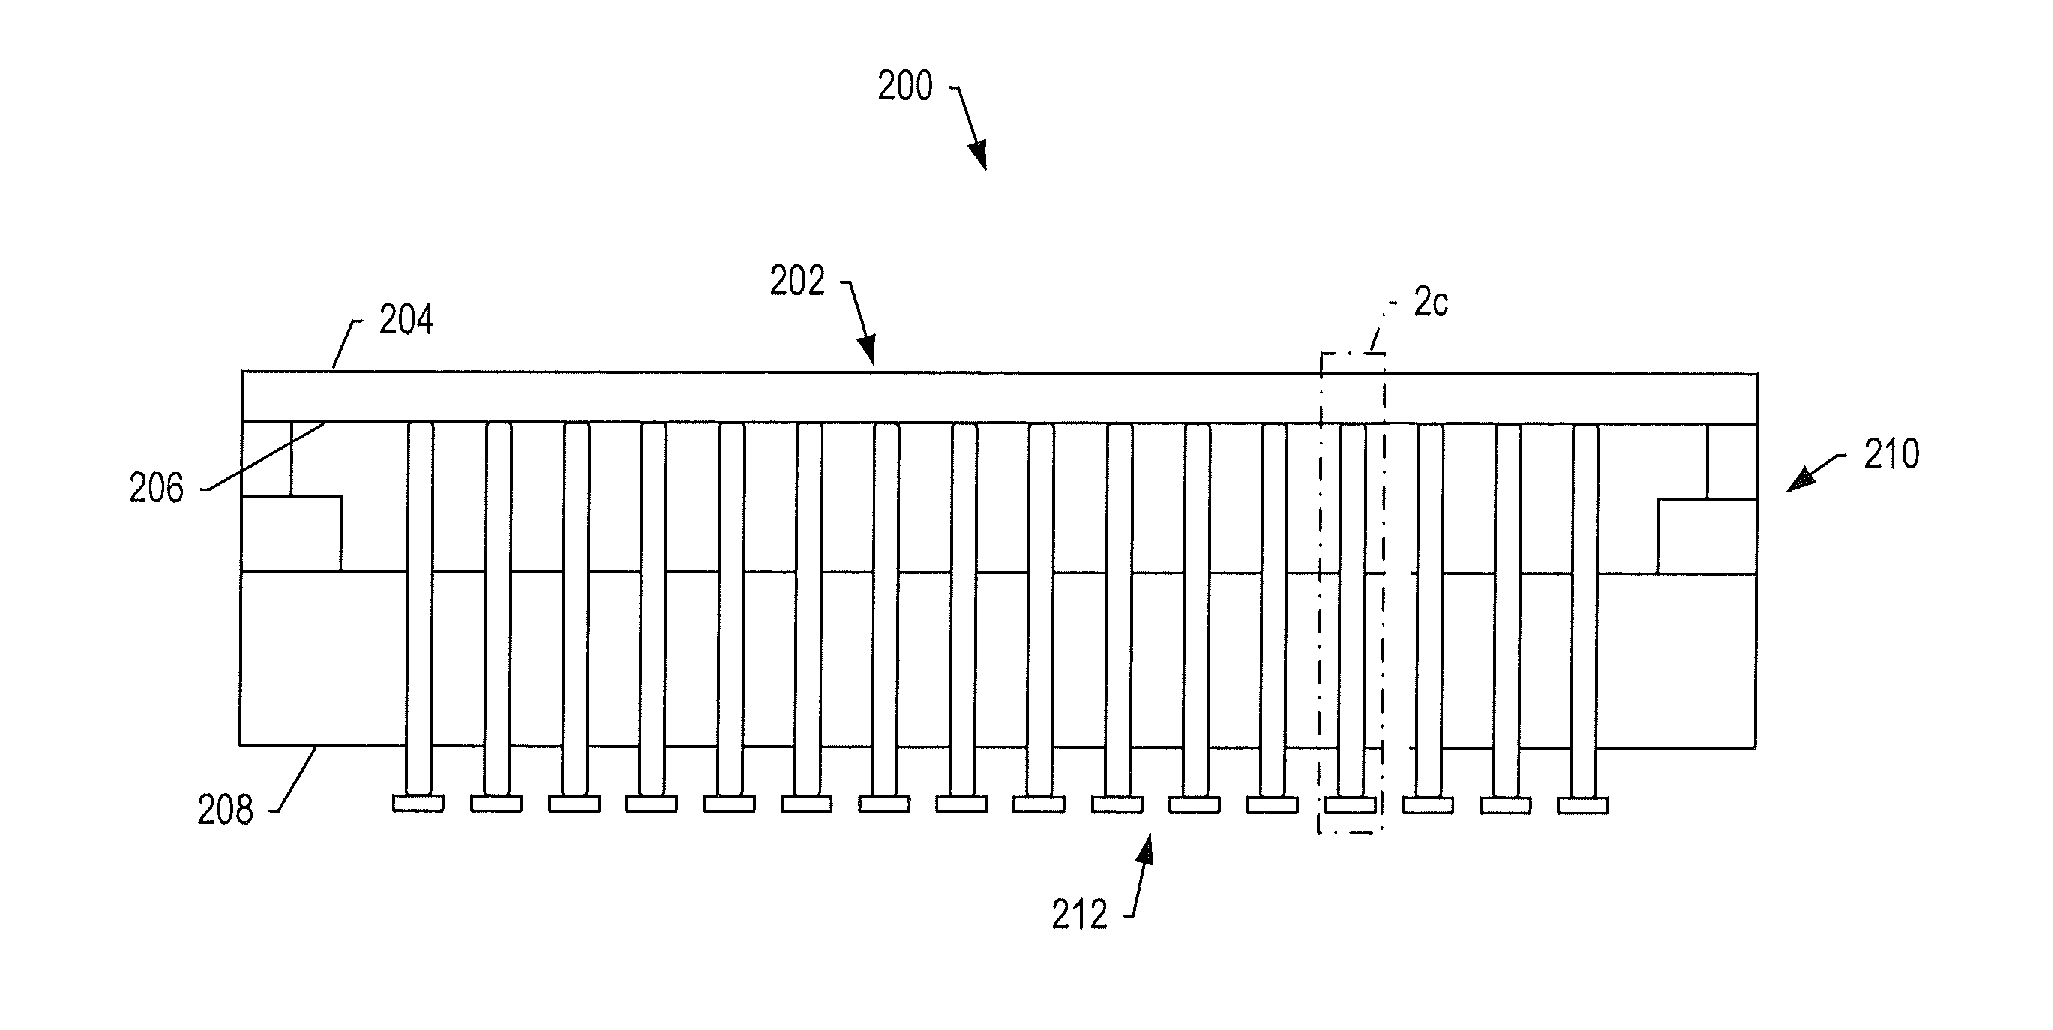 Modal Corrector Mirror With Compliant Actuation For Optical Aberrations